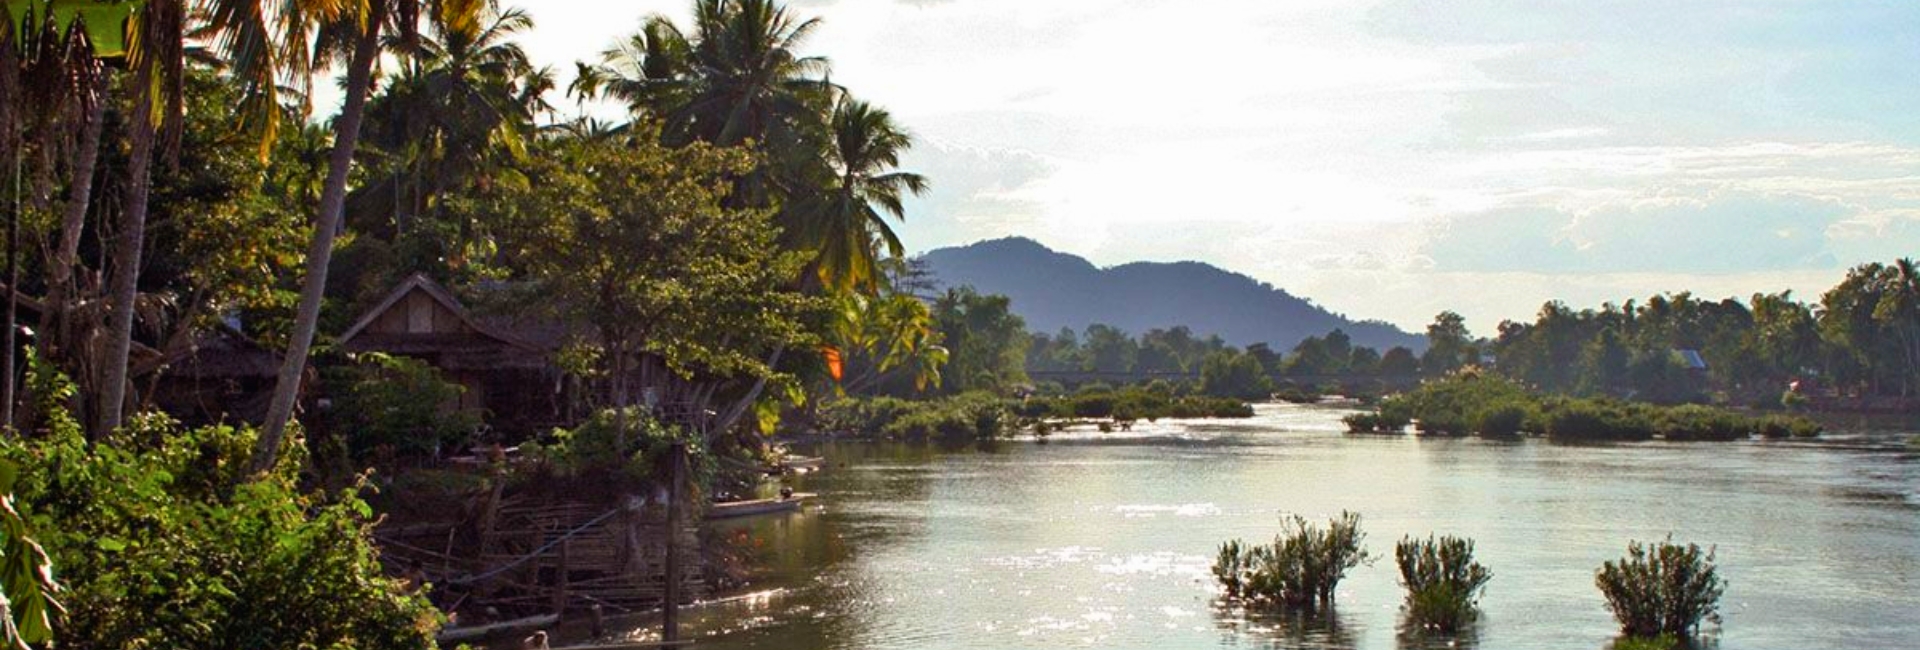 Si Phan Don Islands: Must-have Complete Travel Guide for Laos visiting